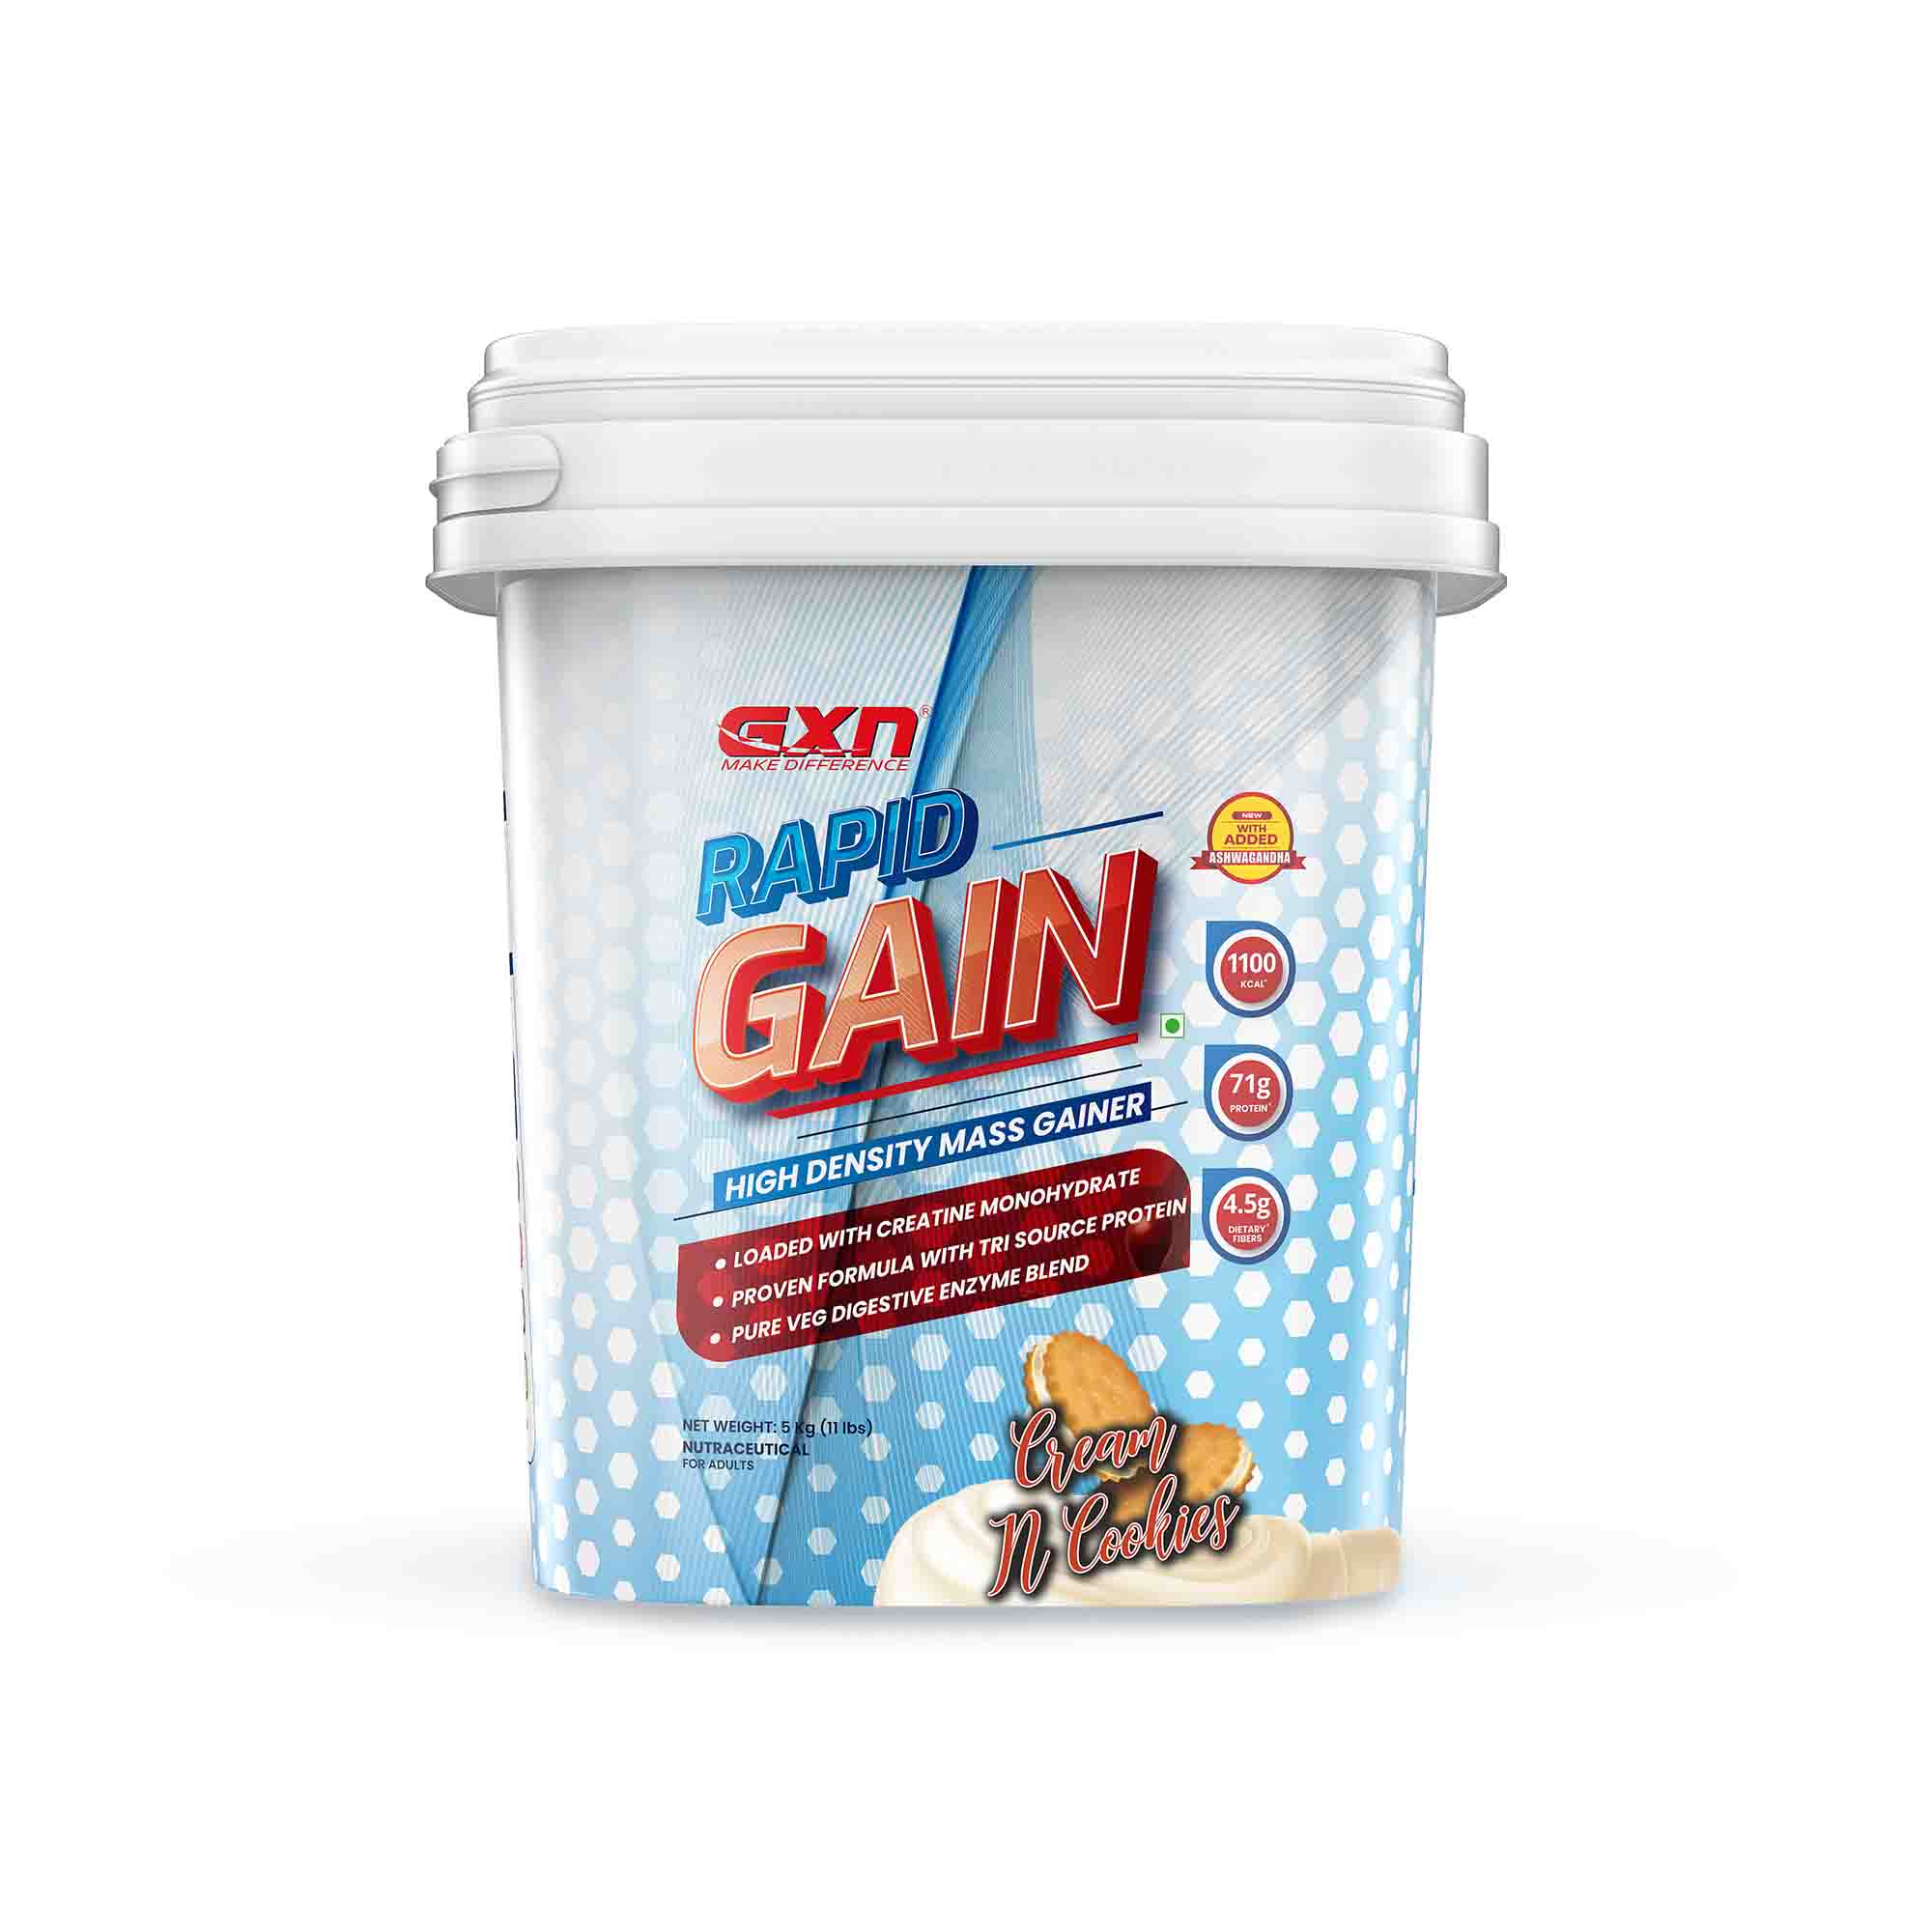 GXN Gainer Powerpacked Nutrition for Superior Muscle Growt - Haryana - Gurgaon ID1522237